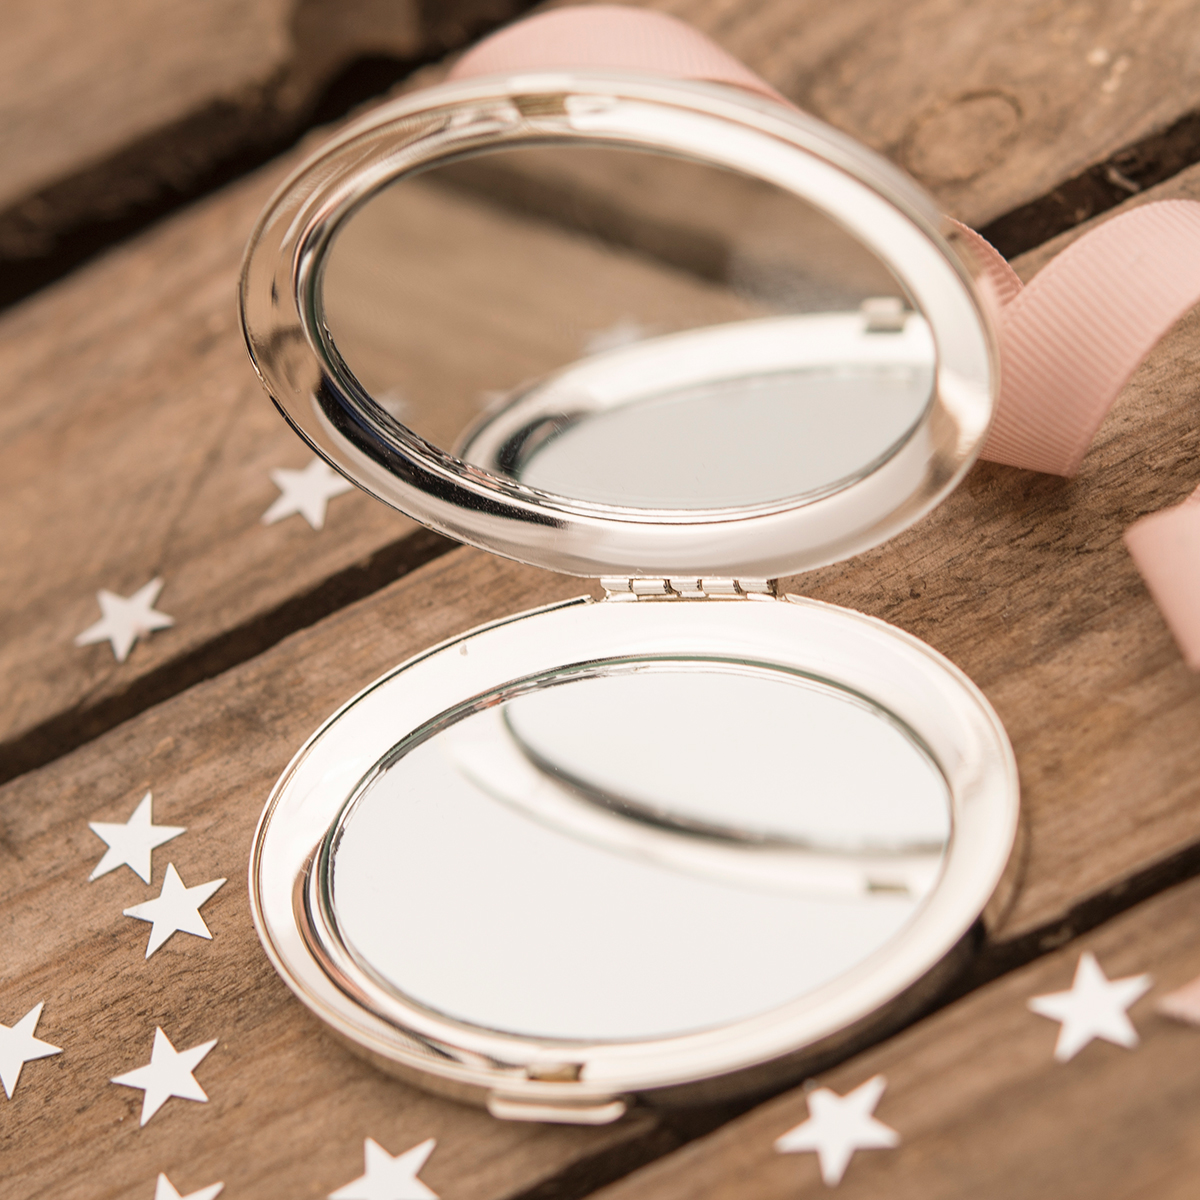 Engraved Silver Oval Compact Mirror -16 Years Of Fabulous